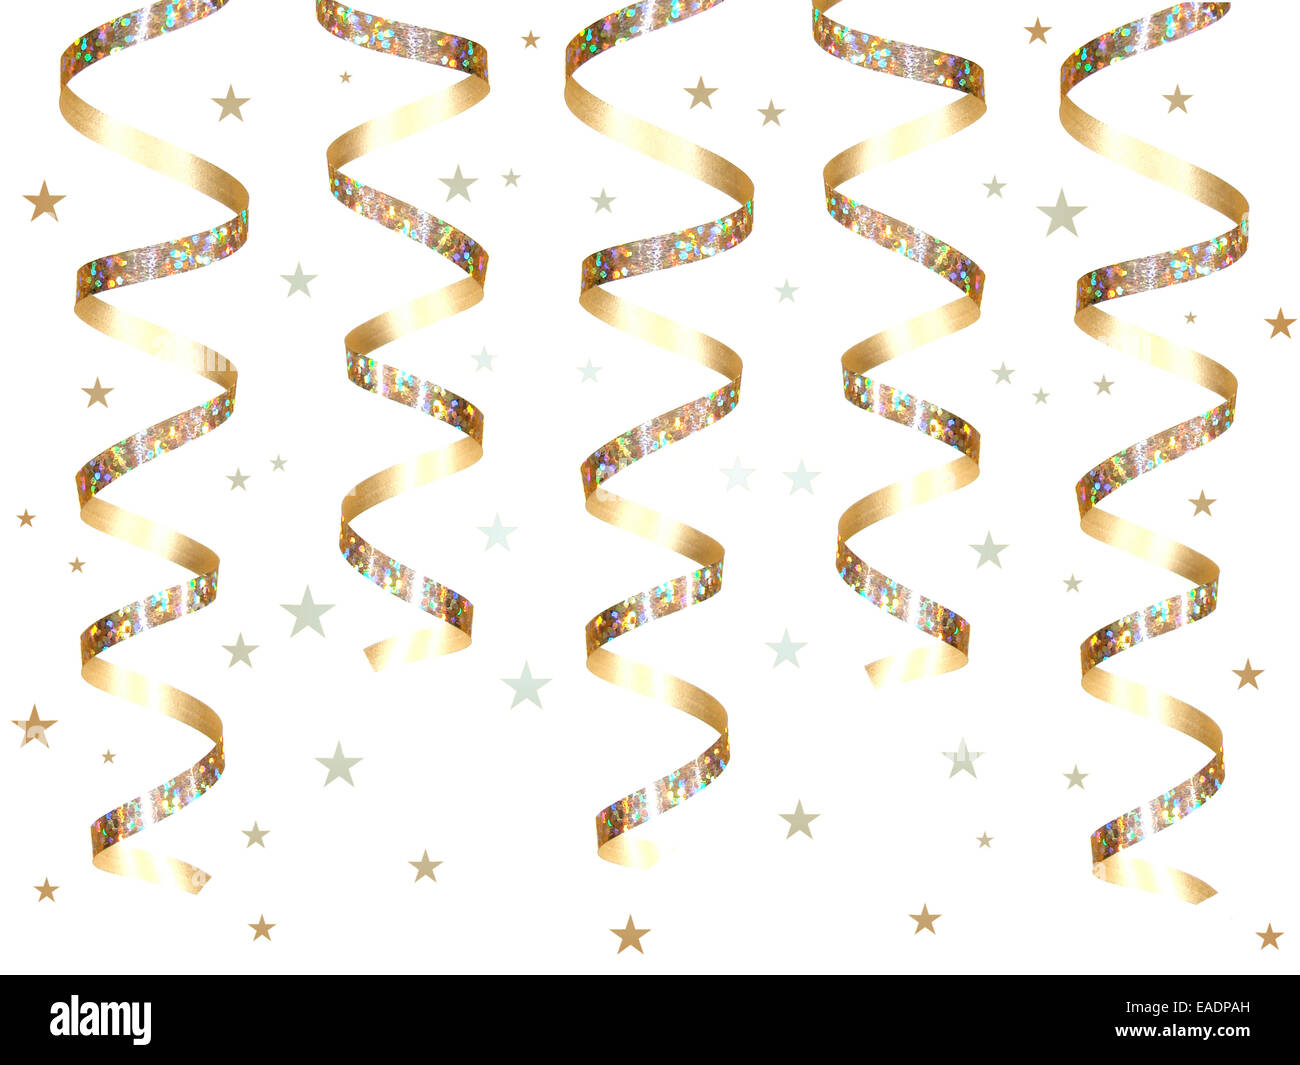 Gold Silver Streamer Confetti Background Stock Vector (Royalty Free)  450394918